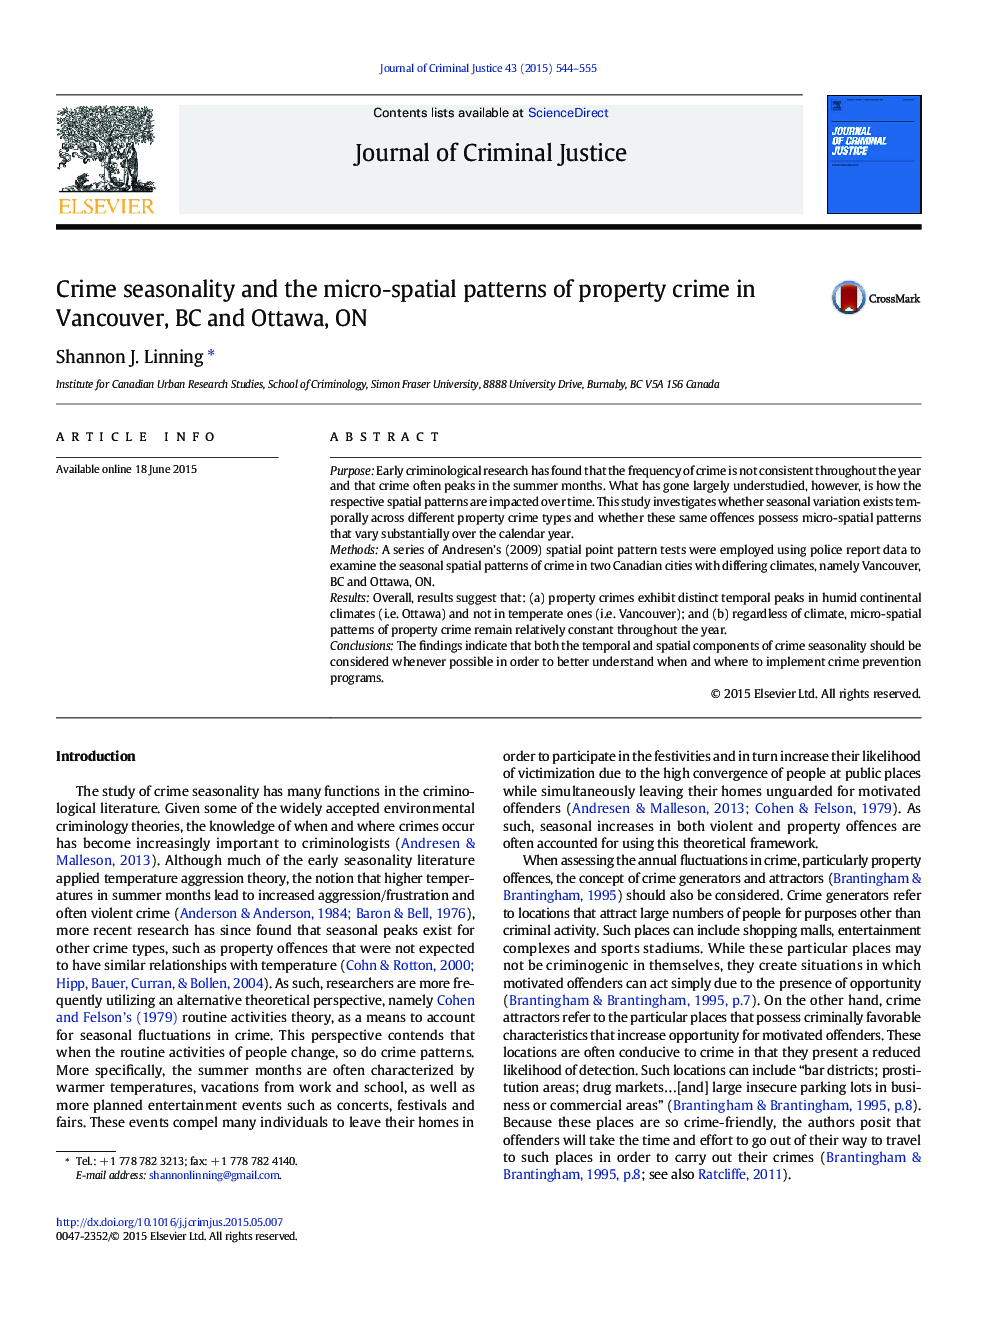 Crime seasonality and the micro-spatial patterns of property crime in Vancouver, BC and Ottawa, ON